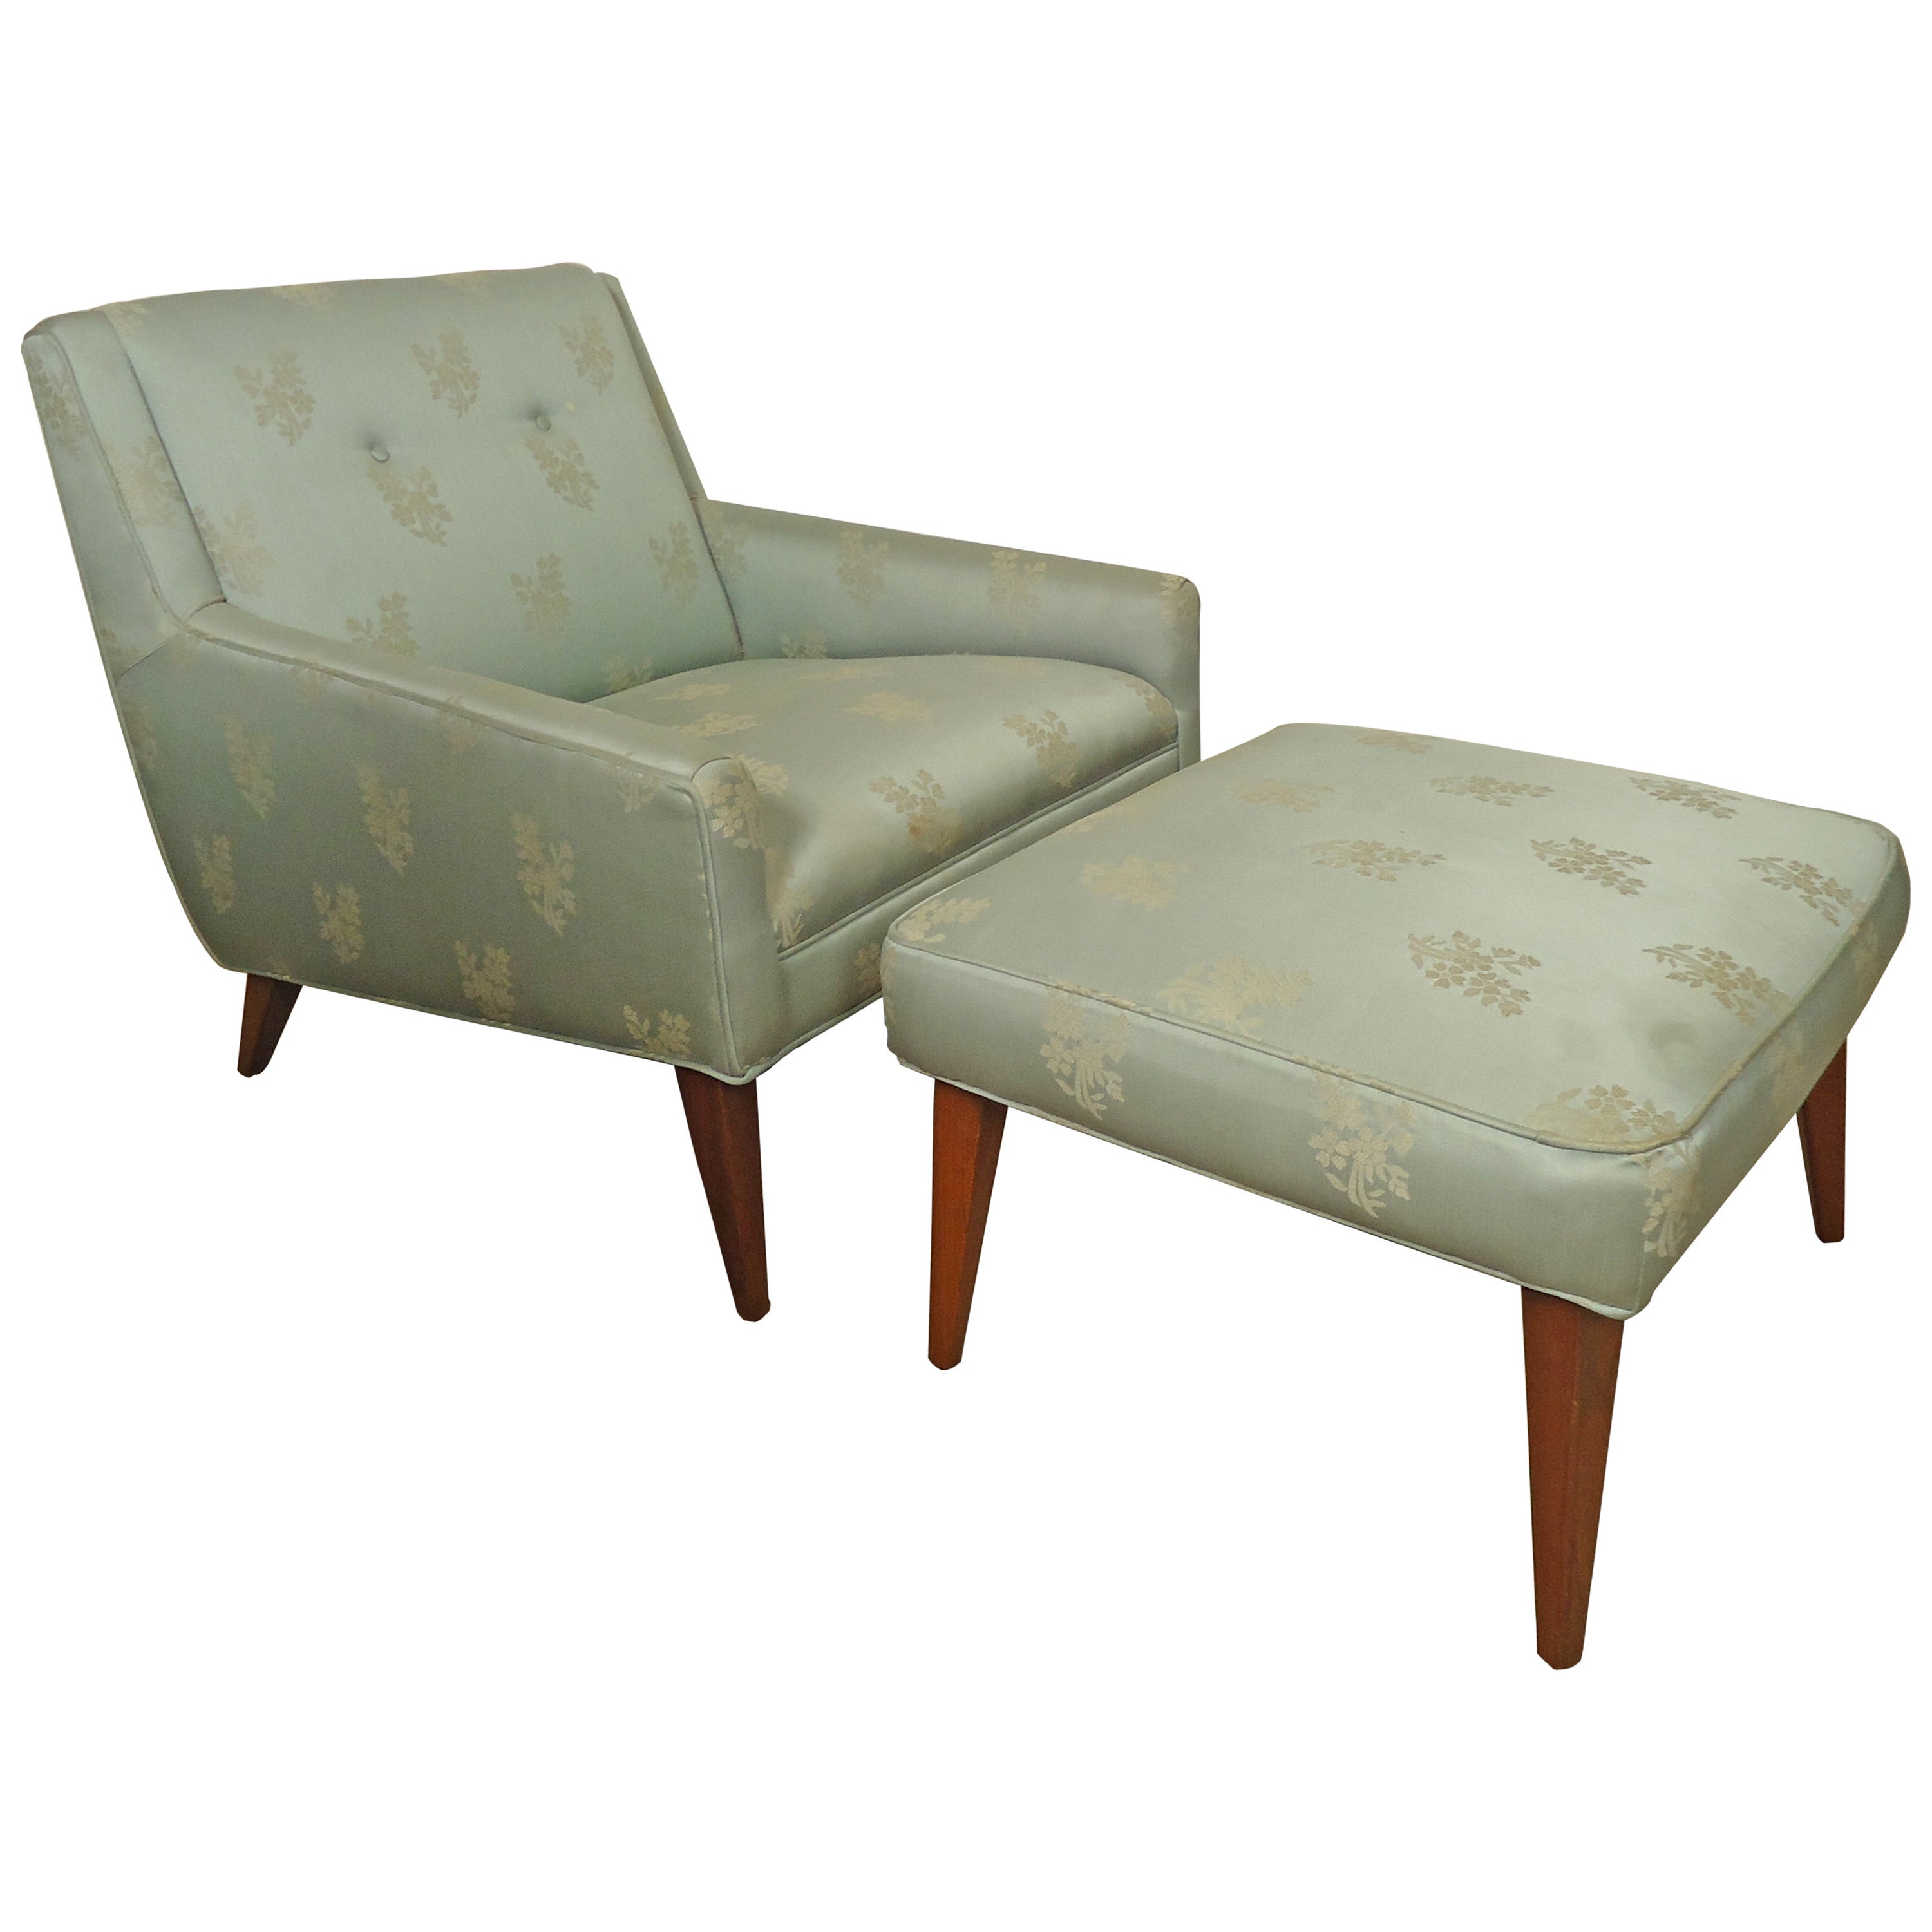 Midcentury Lounge Chair with Matching Ottoman